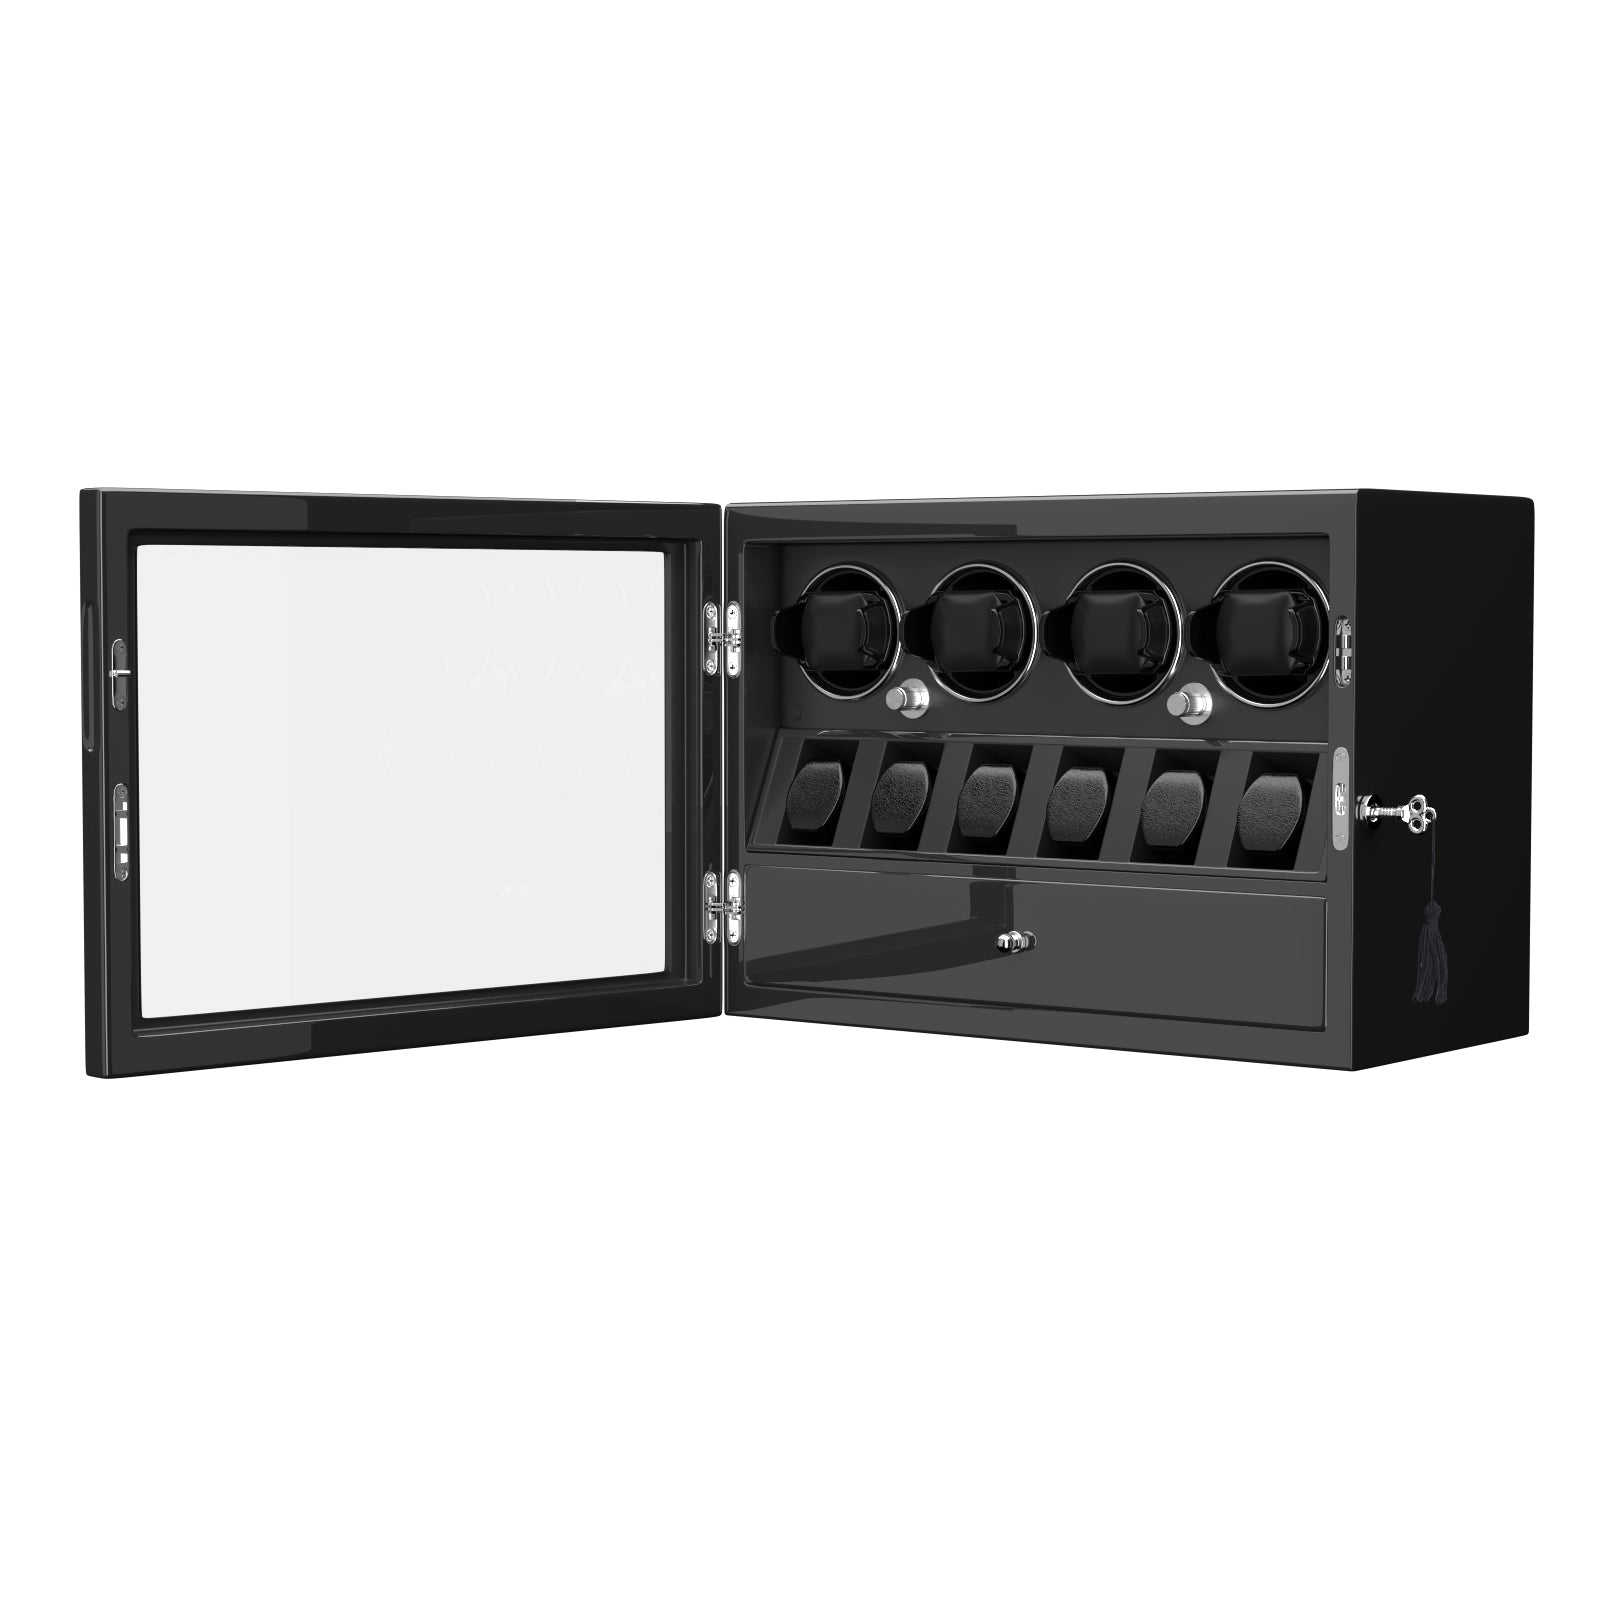 Compact 4 Watch Winders for Automatic Watches with 6 Watches Organizer Display Case - Black